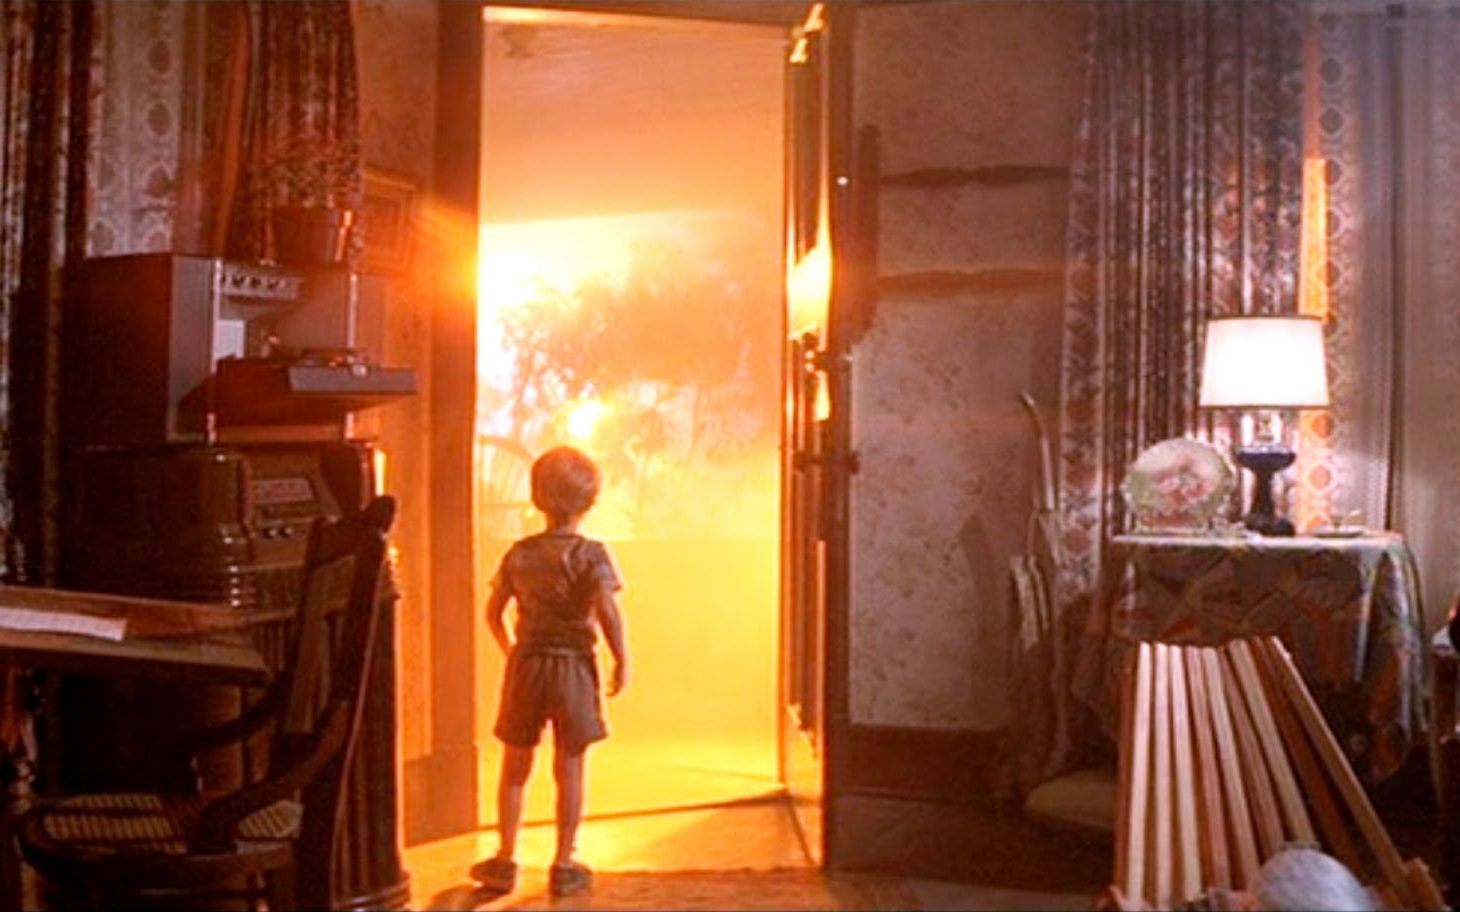 Close Encounters of the Third Kind - Image courtesy of HOME